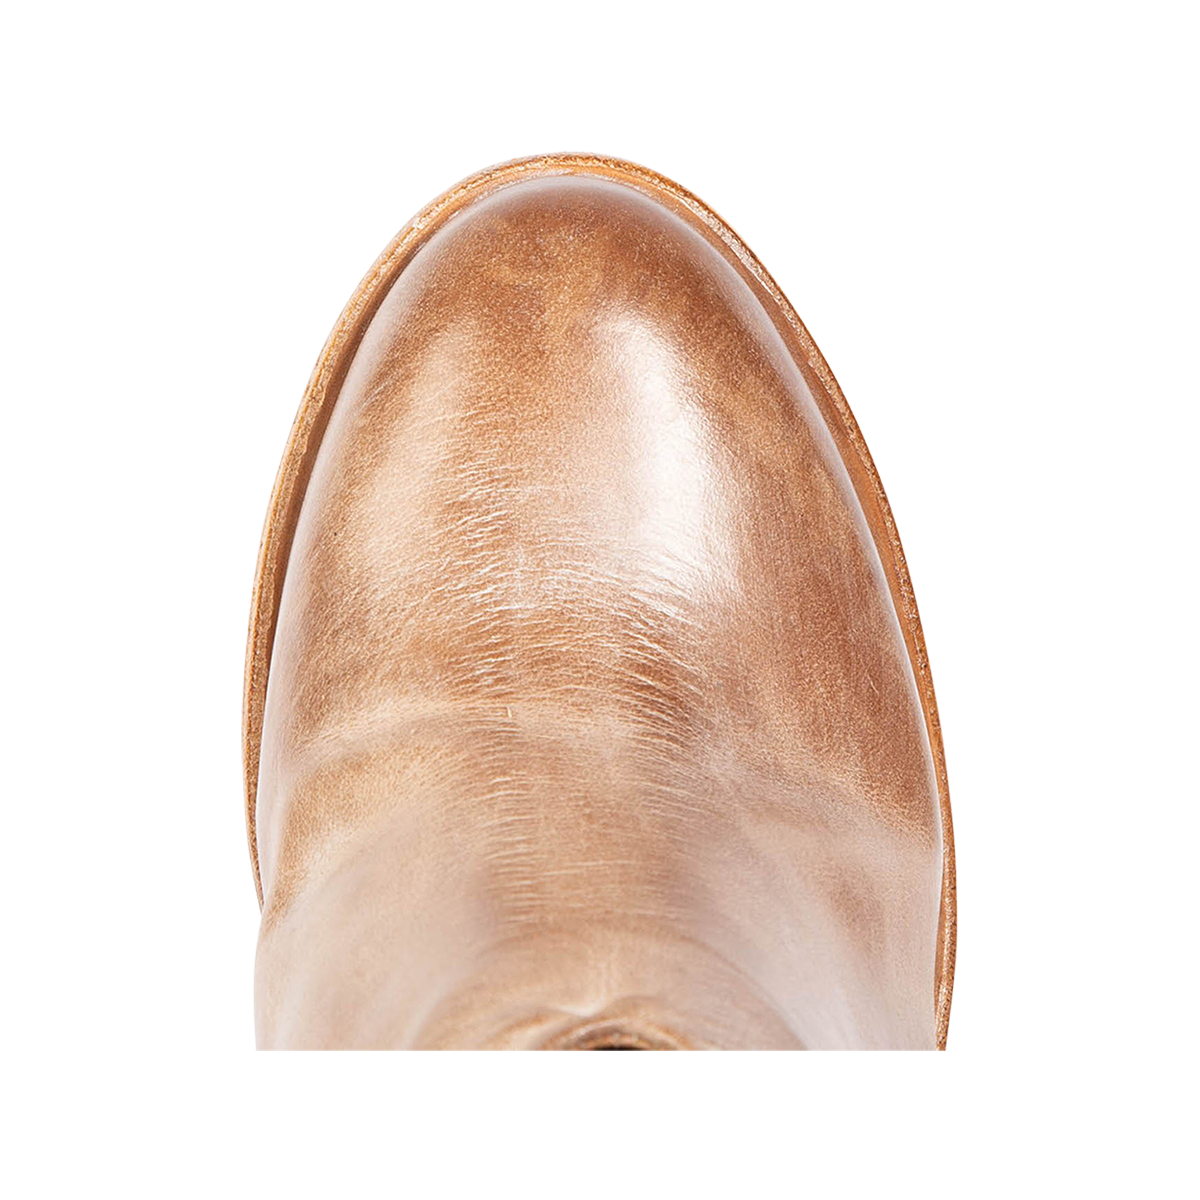 Top view showing round toe on FREEBIRD women's Detroit taupe bootie